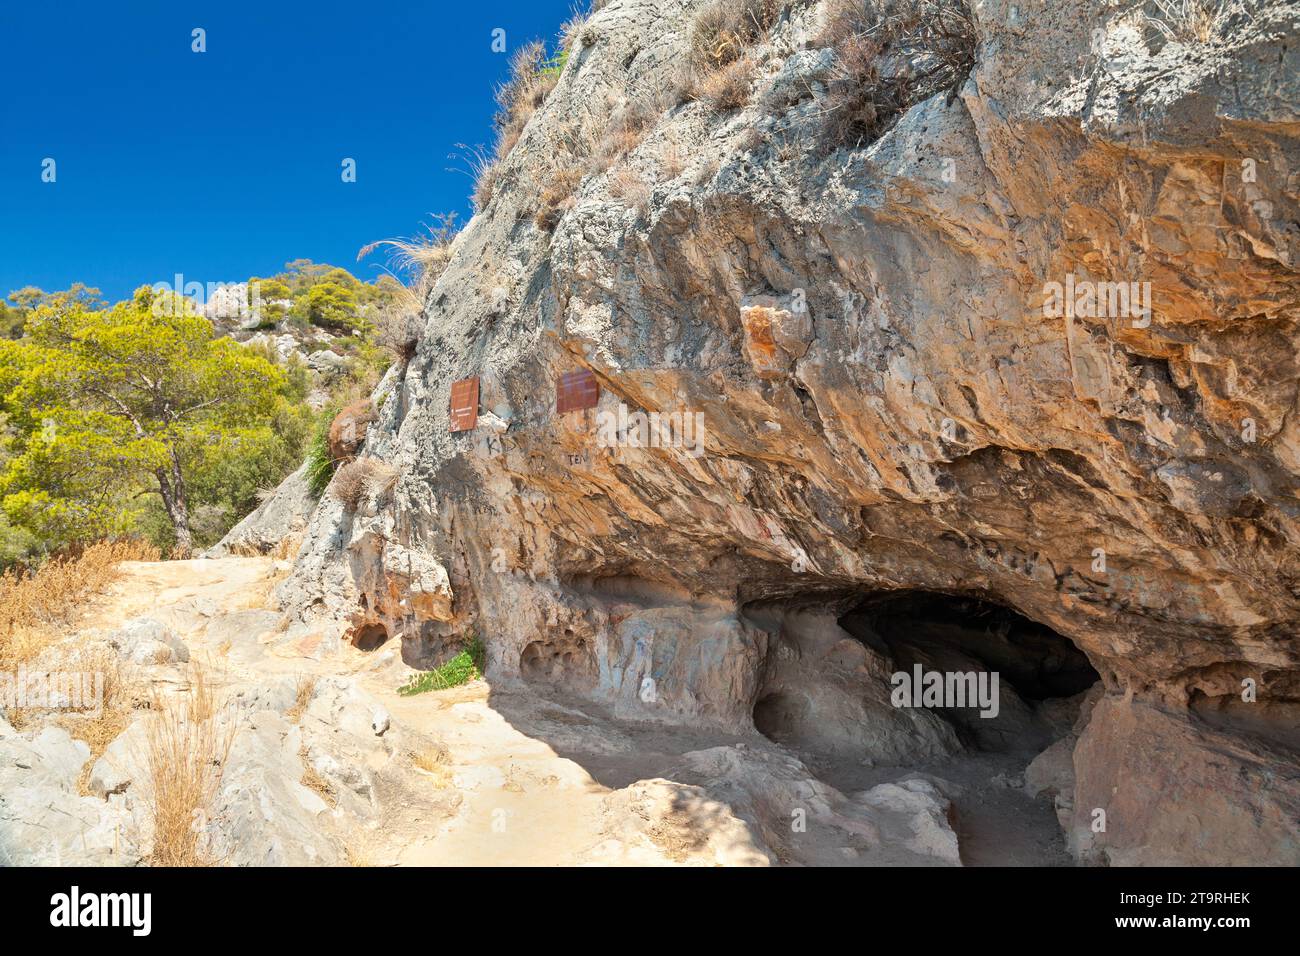 The entrance to the famous Cave of Euripides, where the ancient tragedian poet used to spend much time, in the island of Salamina, near Athens, Greece Stock Photo